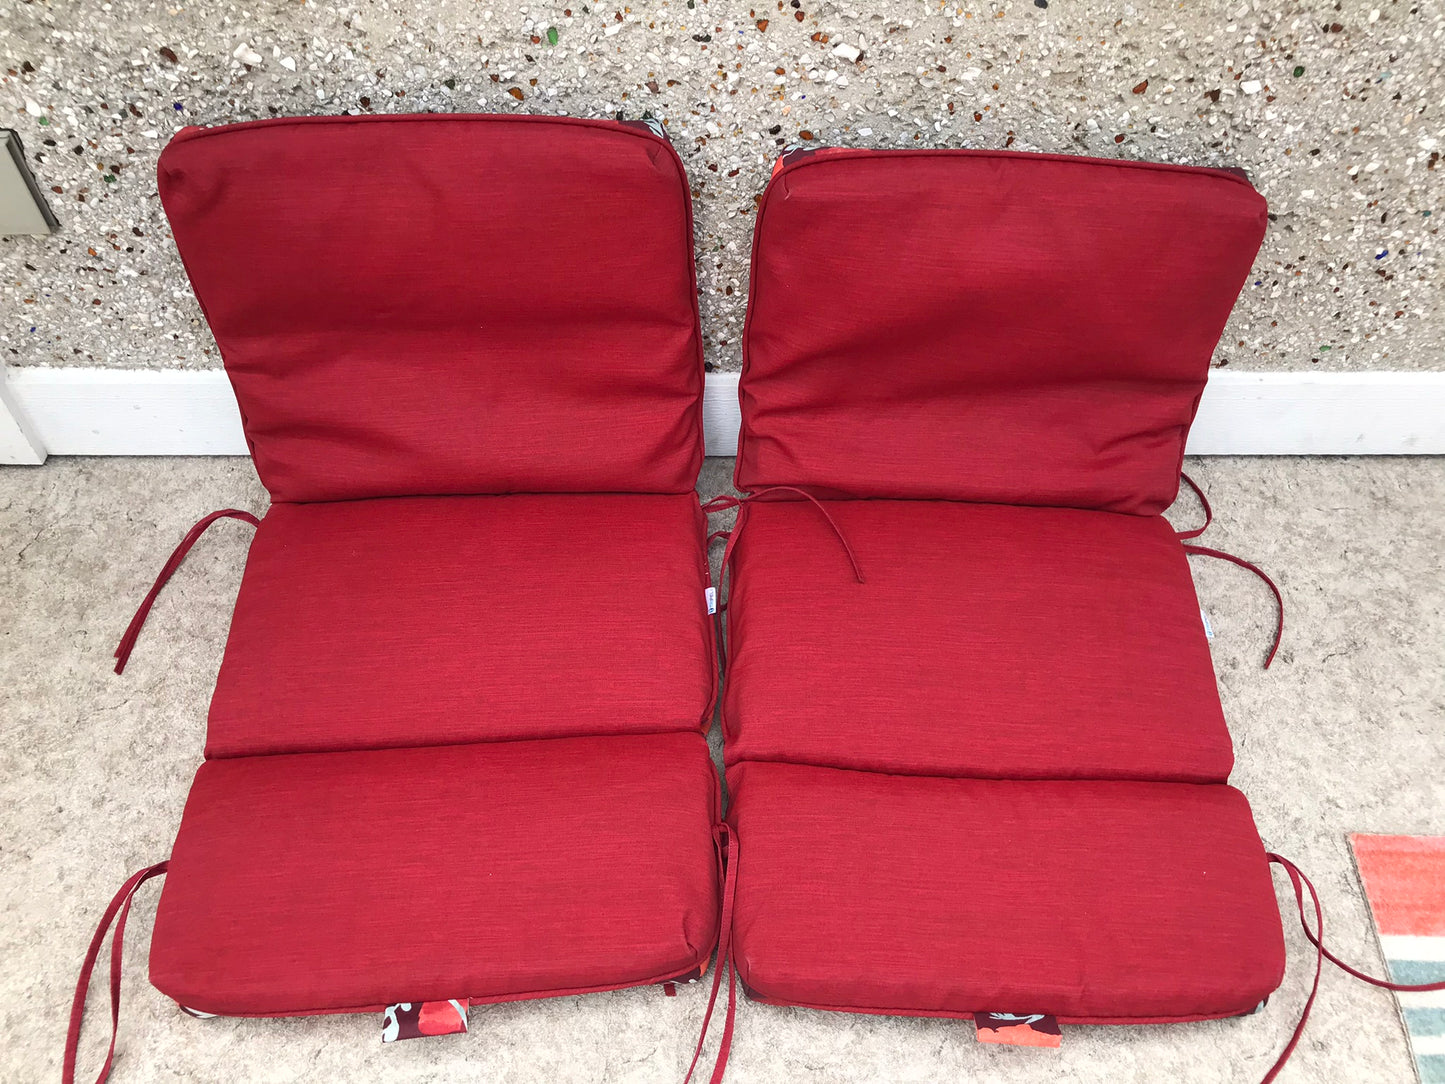 2 Outdoor Patio Chair Cushions Like New Red Poppy Back 22x20 Seat 17x20 Bottom 10x20 Standard Sizes